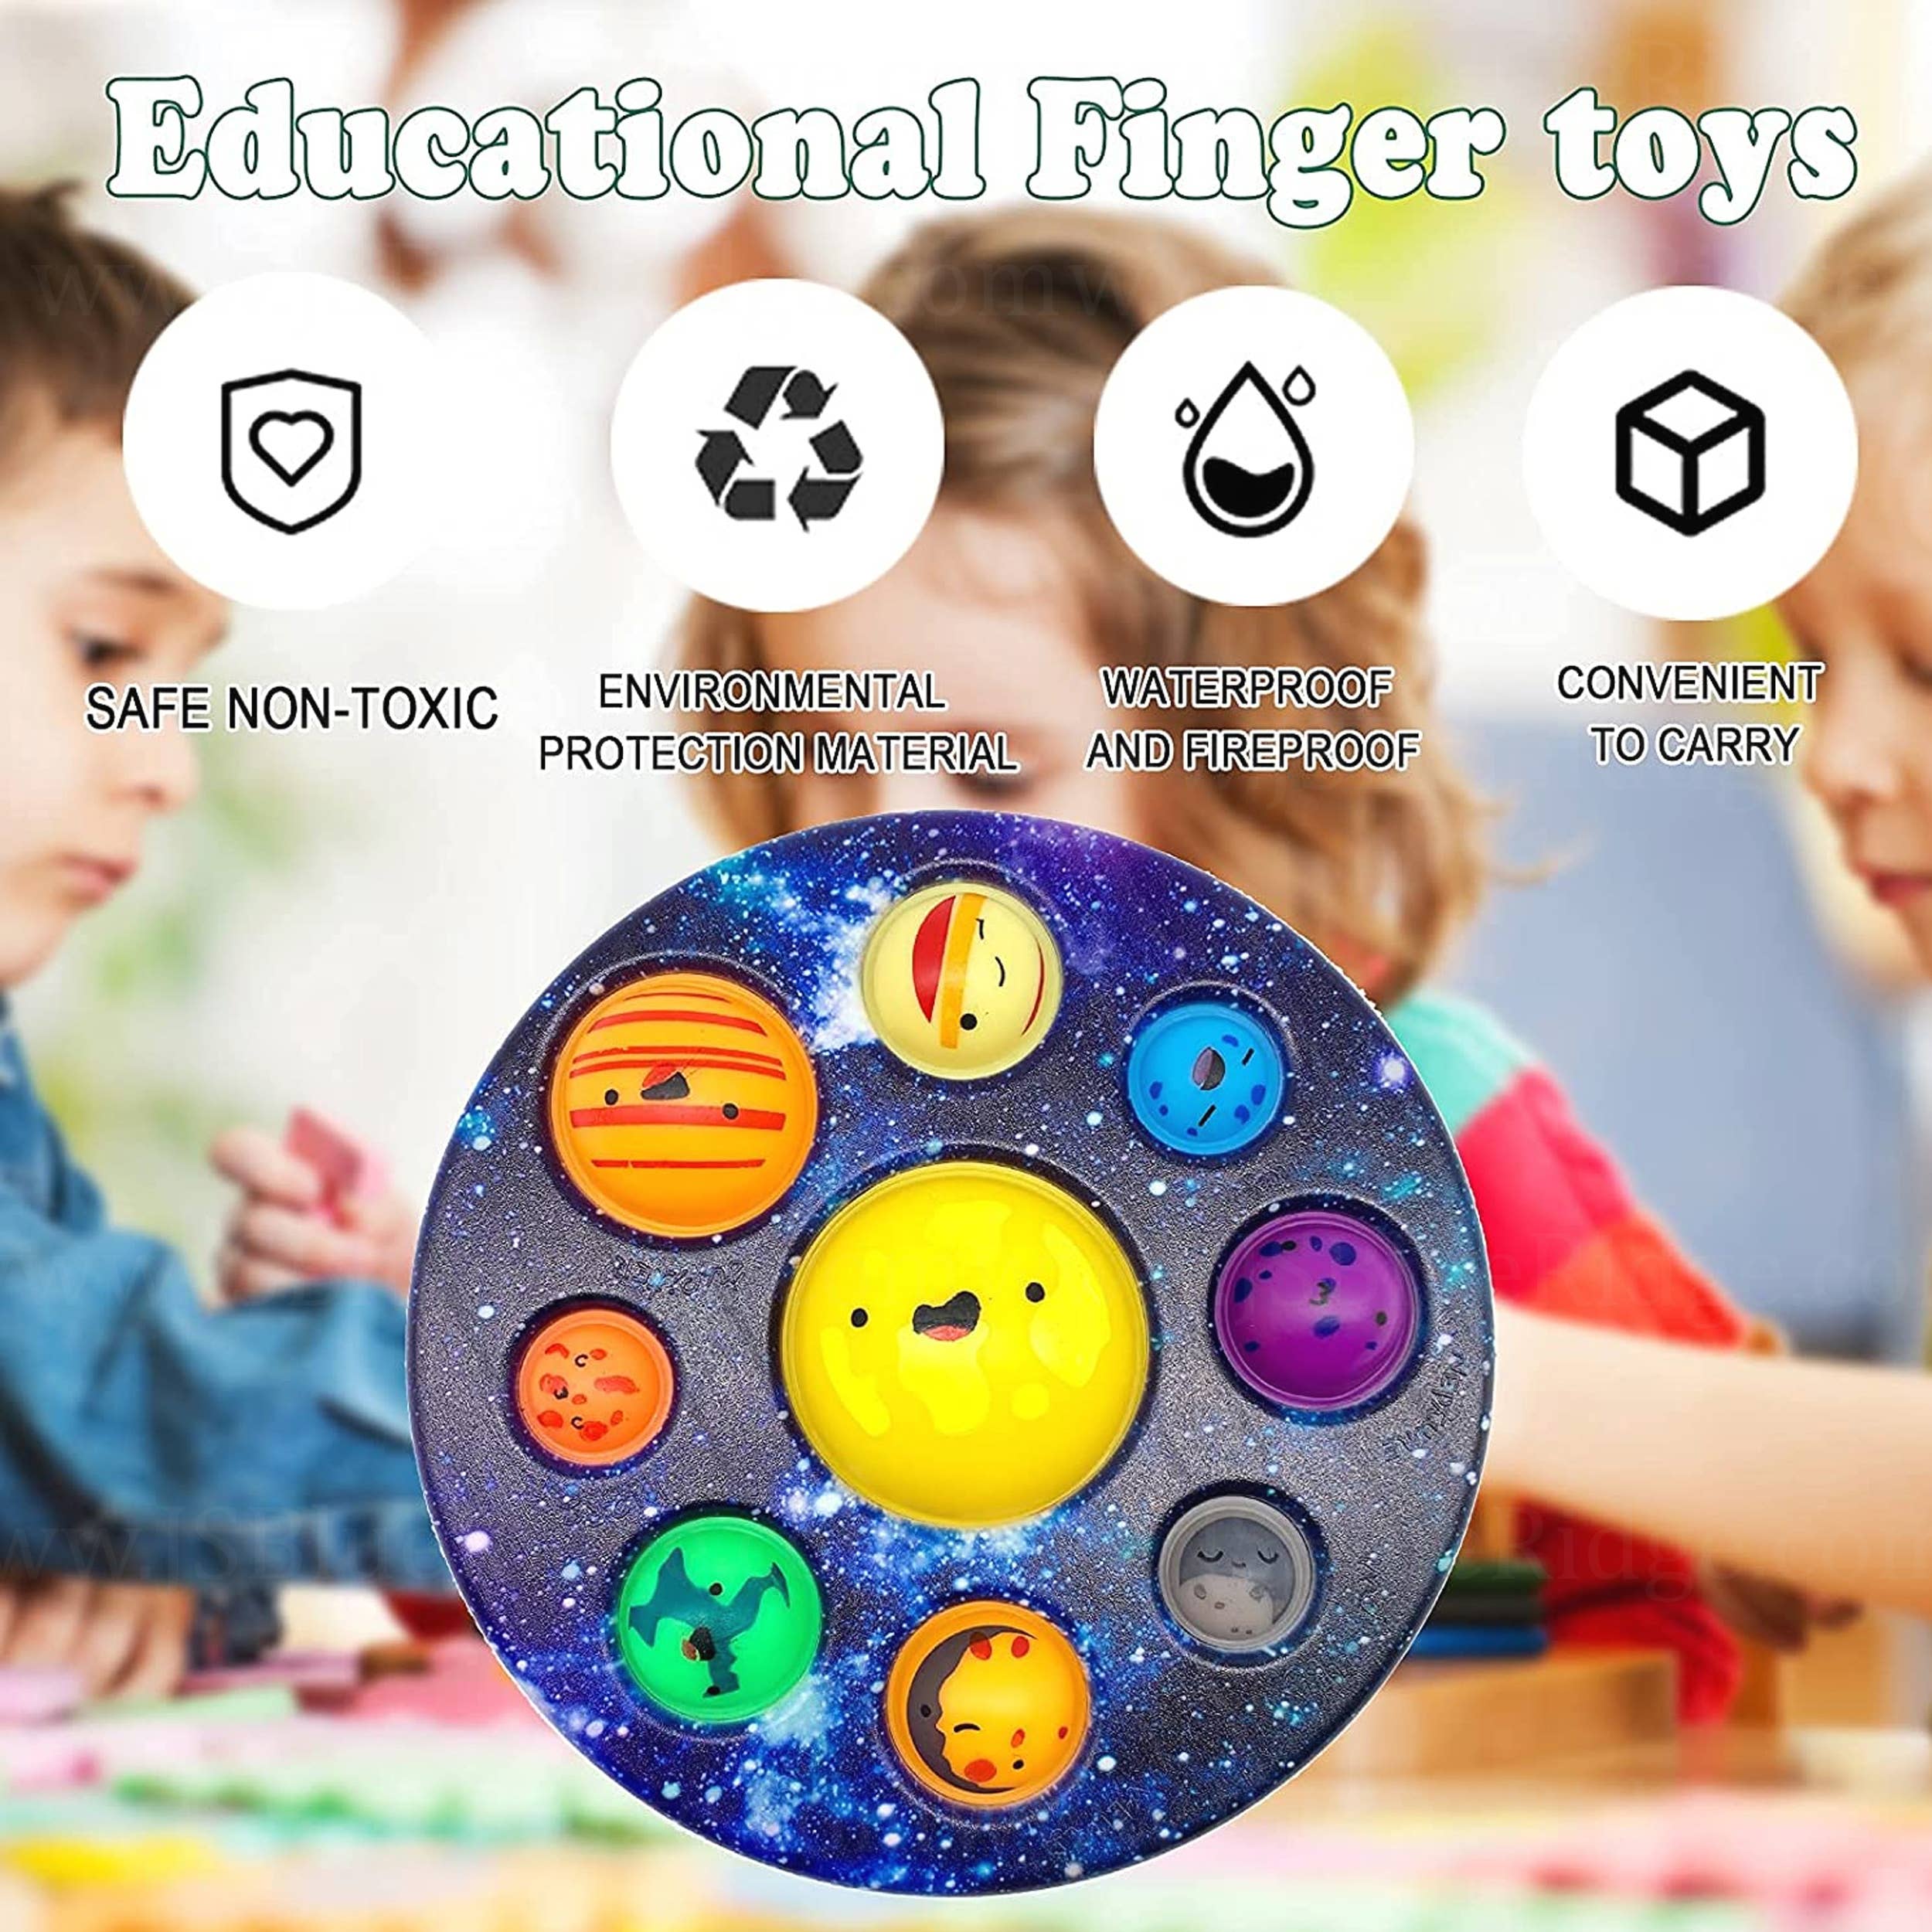 Controller Shaped Fidget Toys Simples-Dimples and Pop in its Black Blue Anxiety Toy Relieves Stress Anxiety for Kids Adults Fidget Poppers Tie Dye Silicone Sensory Push Bubble Popper 